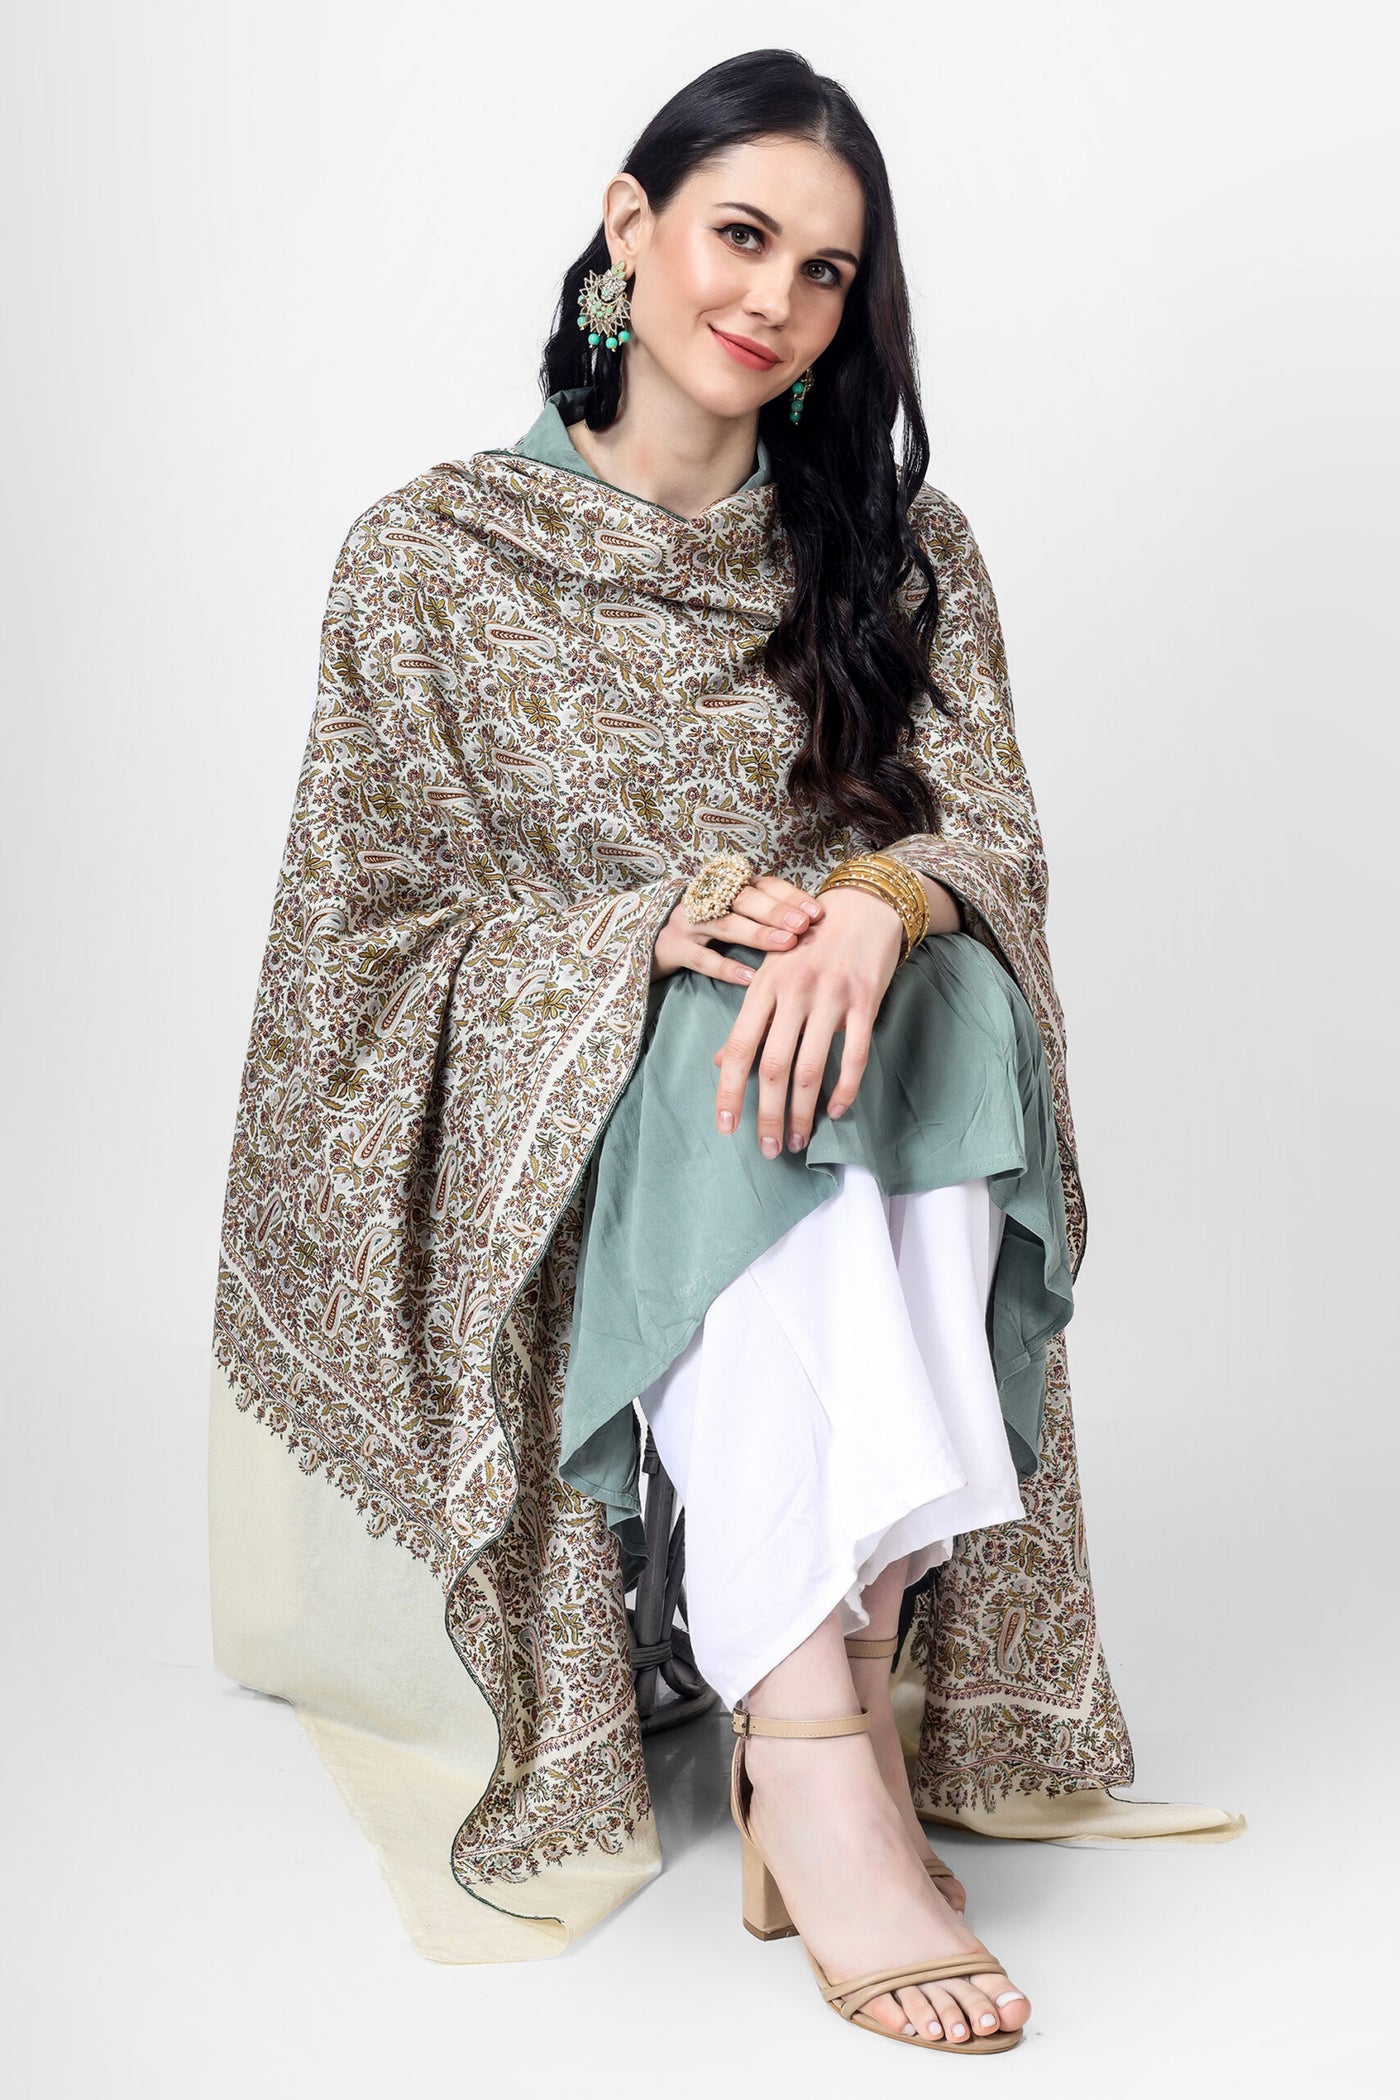  This White JAMA shawl is that iconic fashion accessory that can instantly communicate to the world the passion and exquisite tastes of its owner.